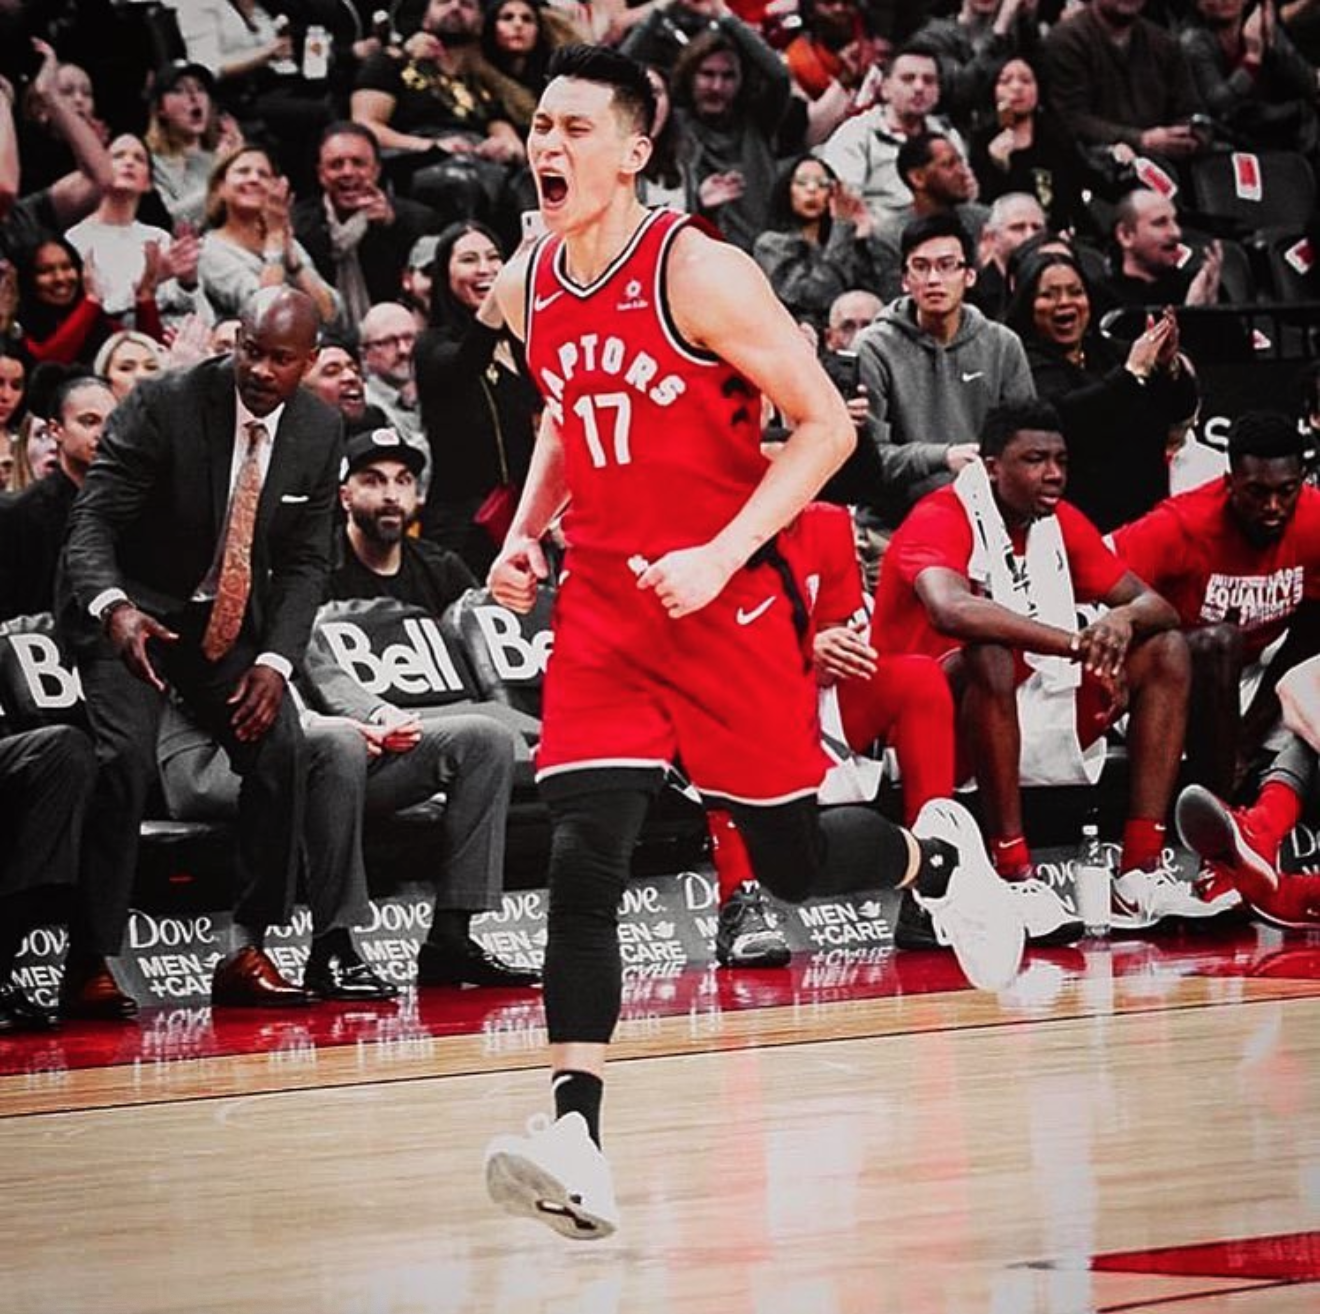 Edit: Jeremy Lin has since agreed to play in the CBA with the Beijing Ducks...